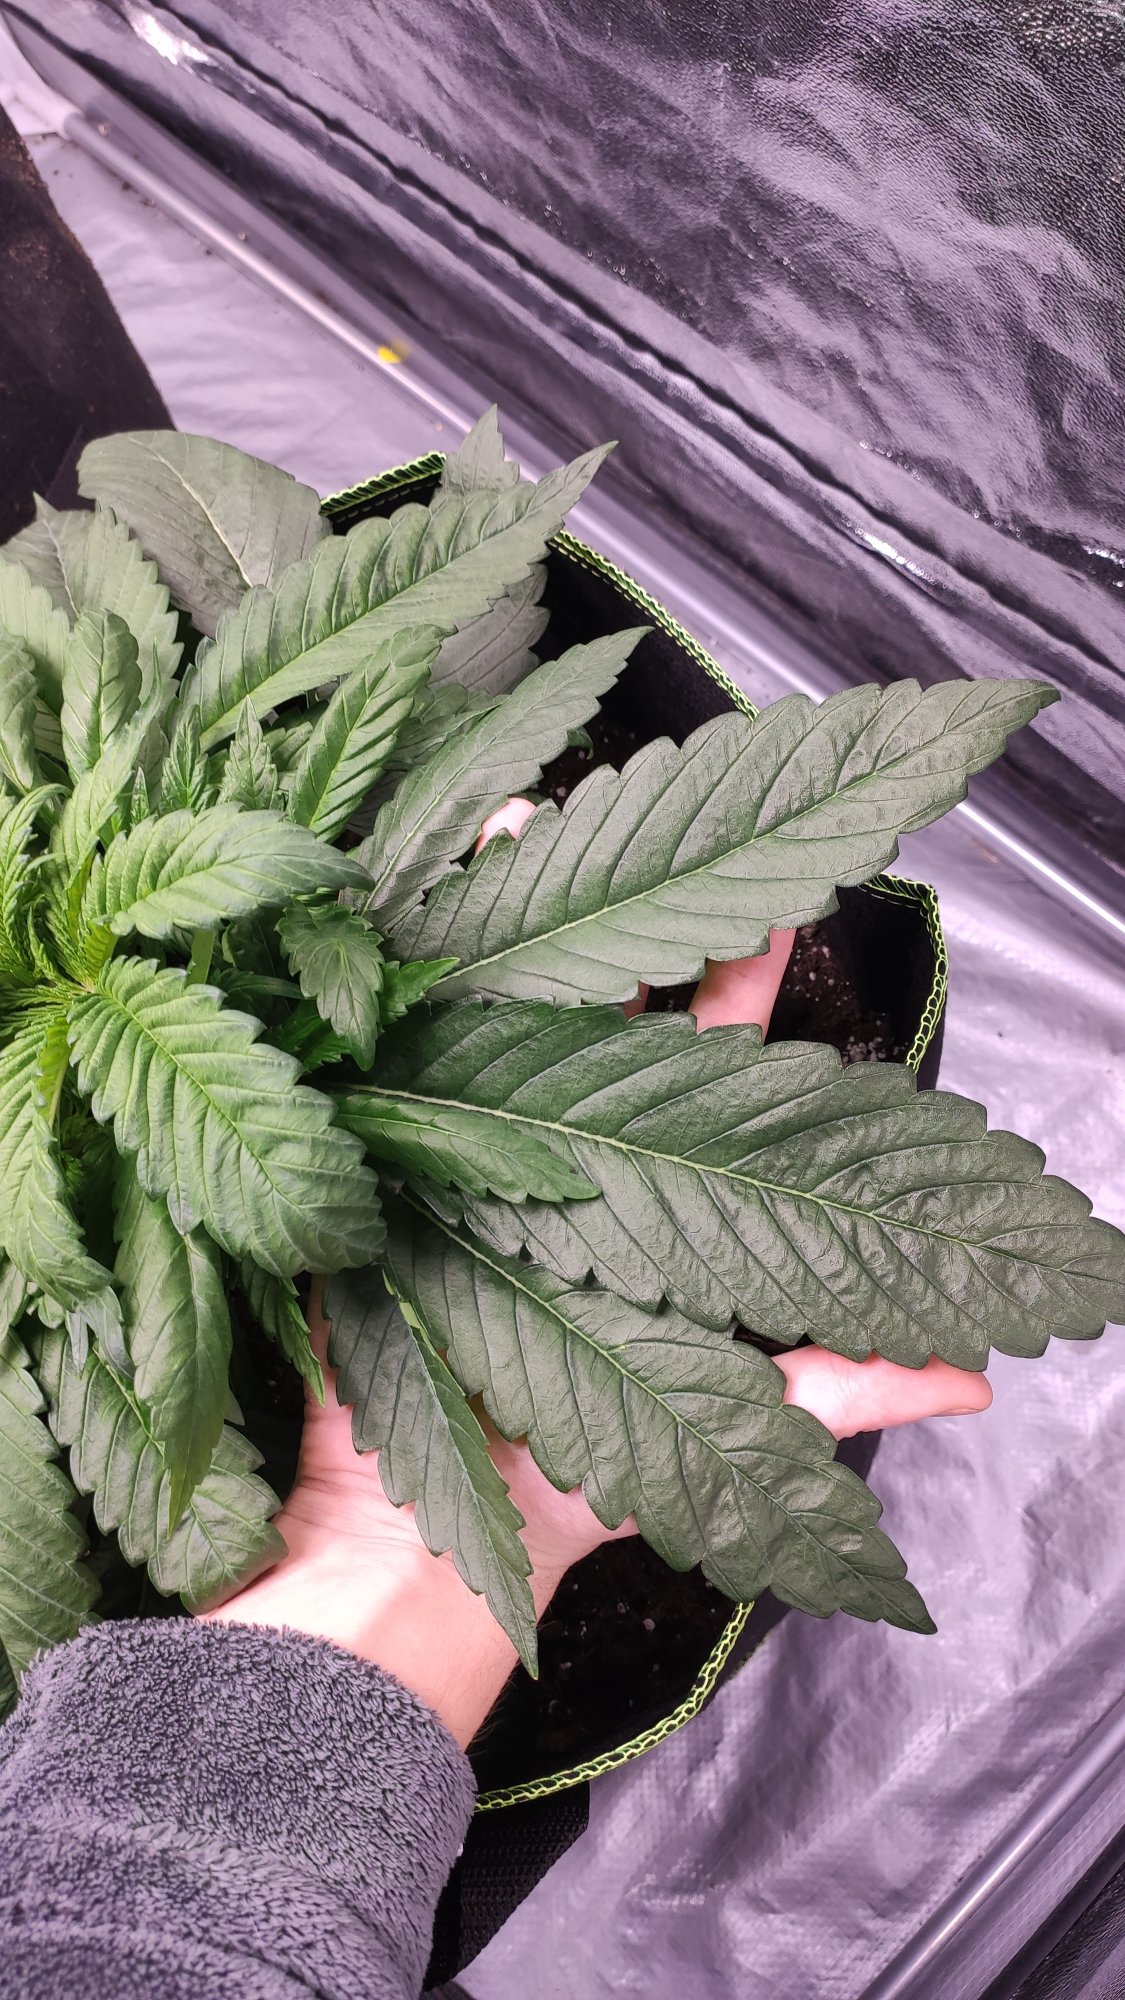 Did i get lucky on a phenotype very explosive growth 2